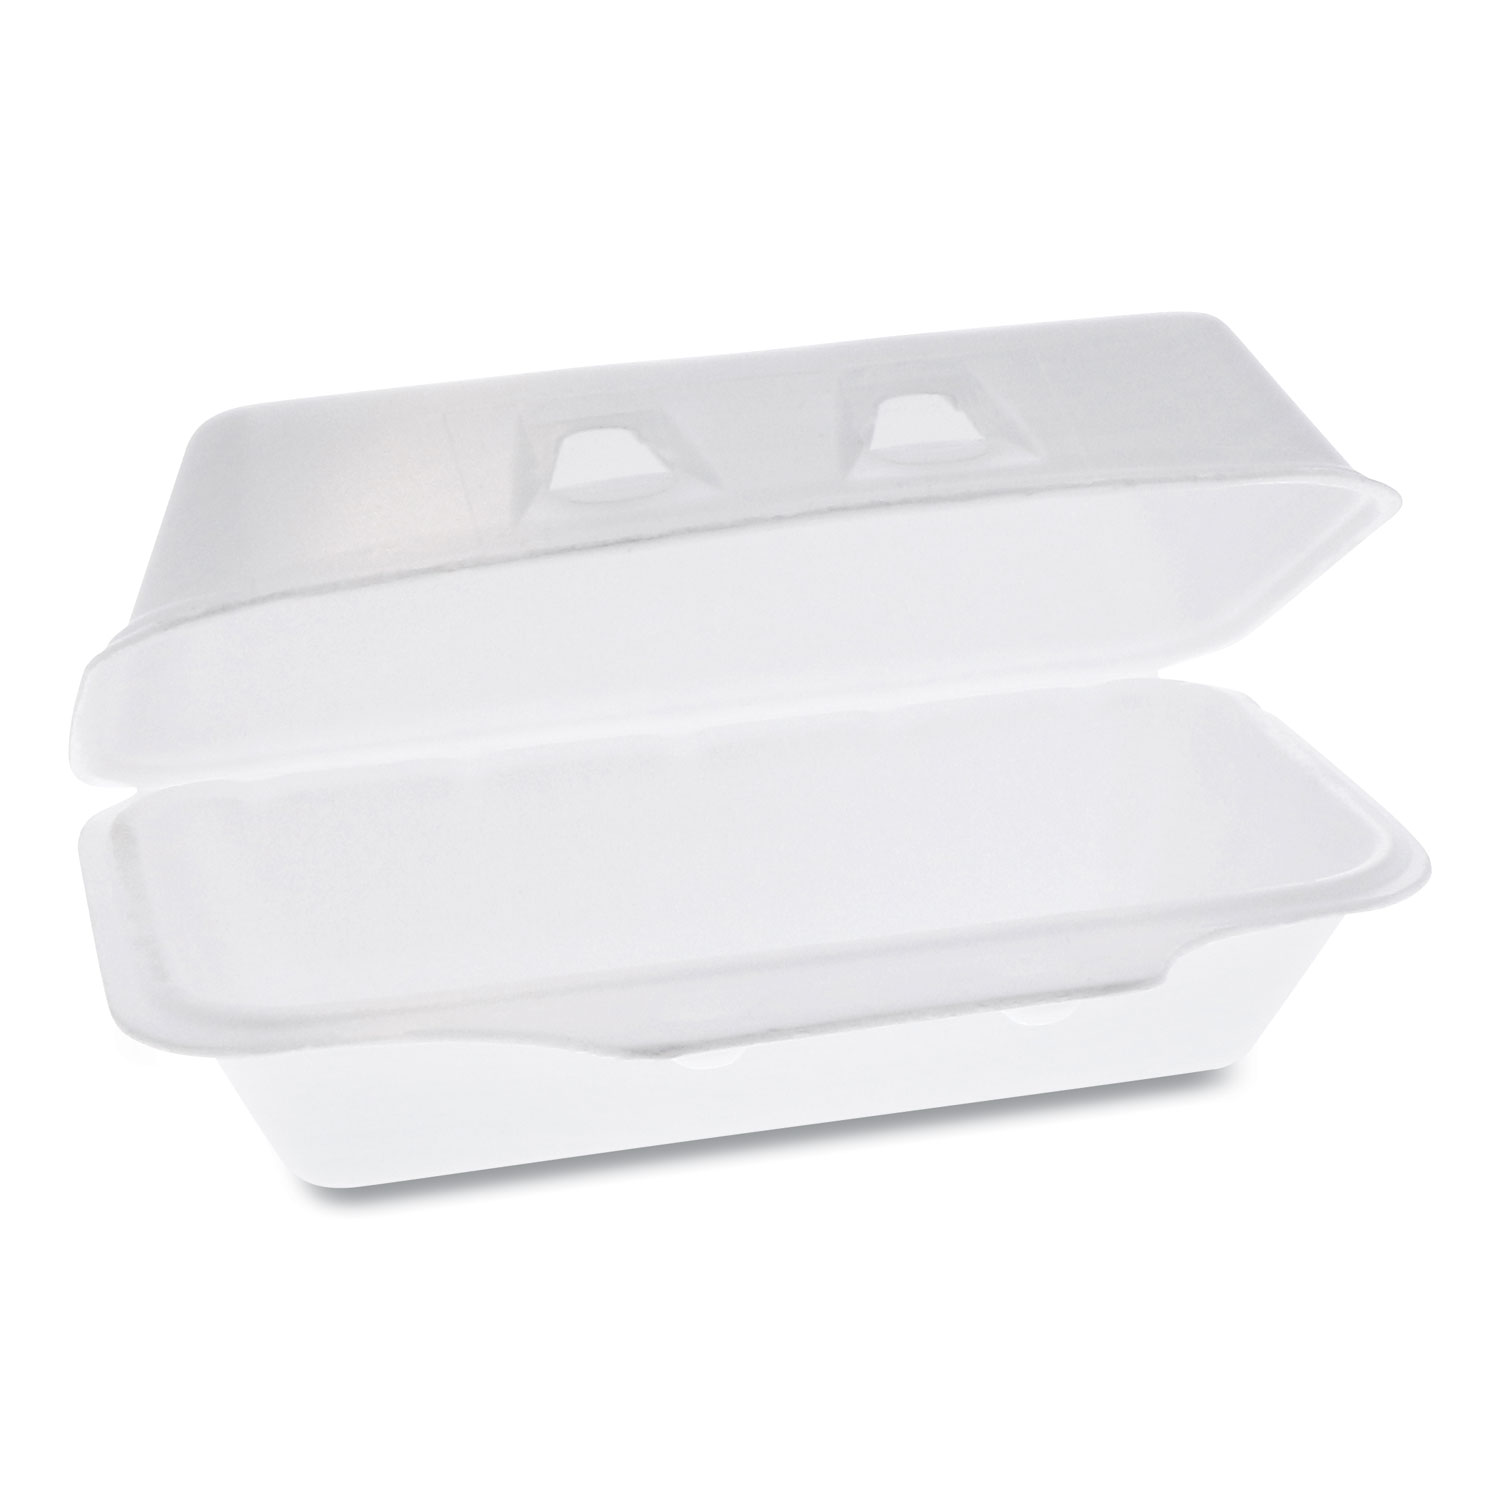  Pactiv YHLW01840000 SmartLock Foam Hinged Containers, Medium, 8.75 x 4.5 x 3.13, 1-Compartment, White, 440/Carton (PCTYHLW01840000) 